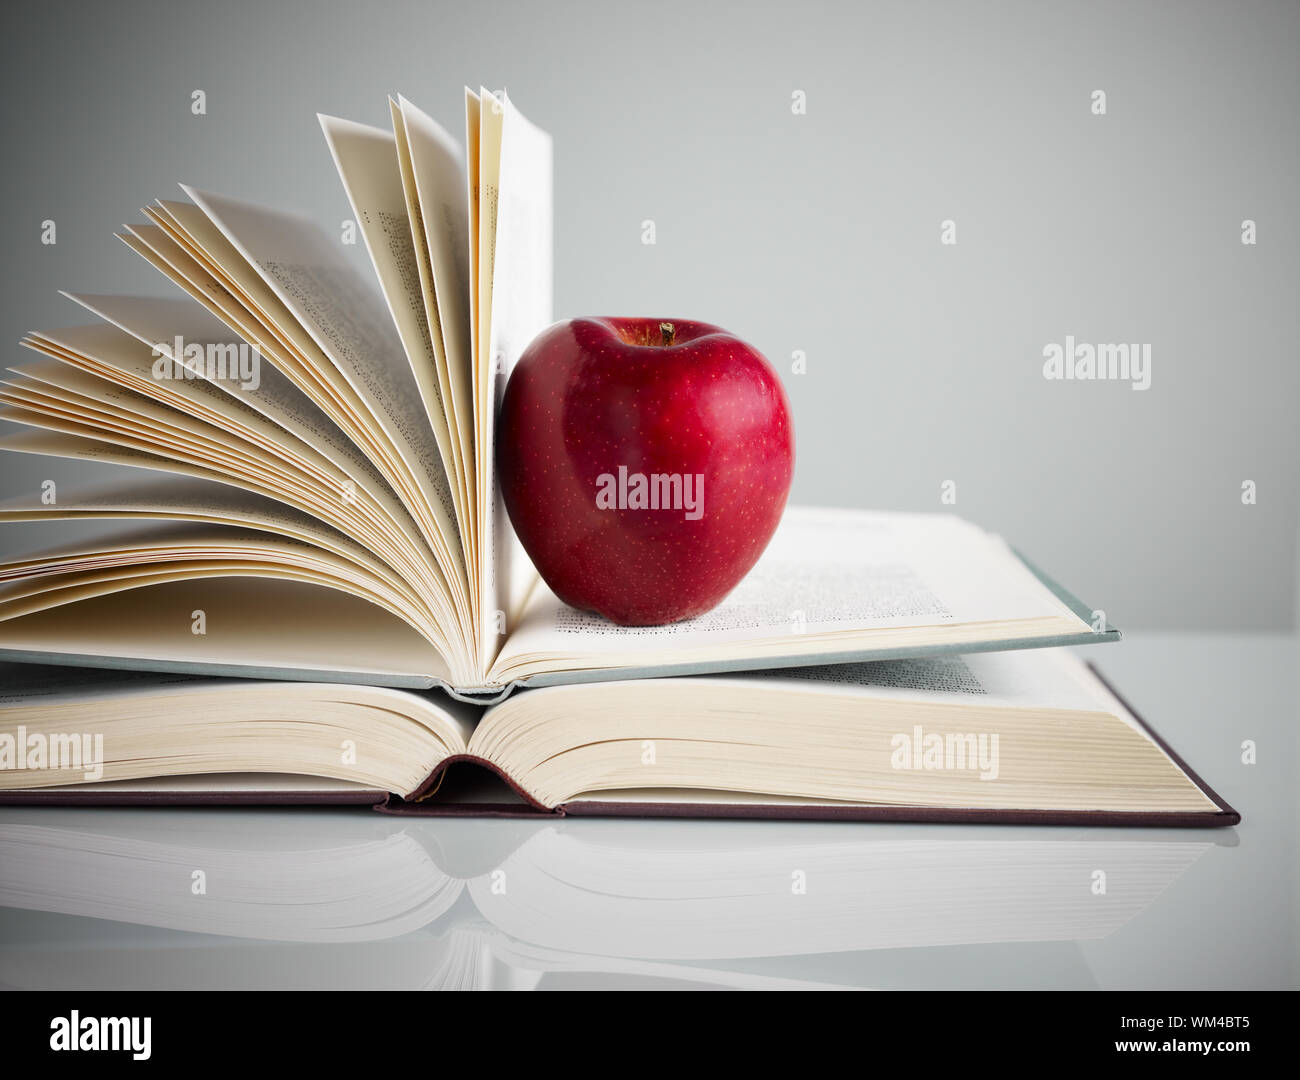 Pile Of Books And Red Apple On Desk Copy Space Stock Photo